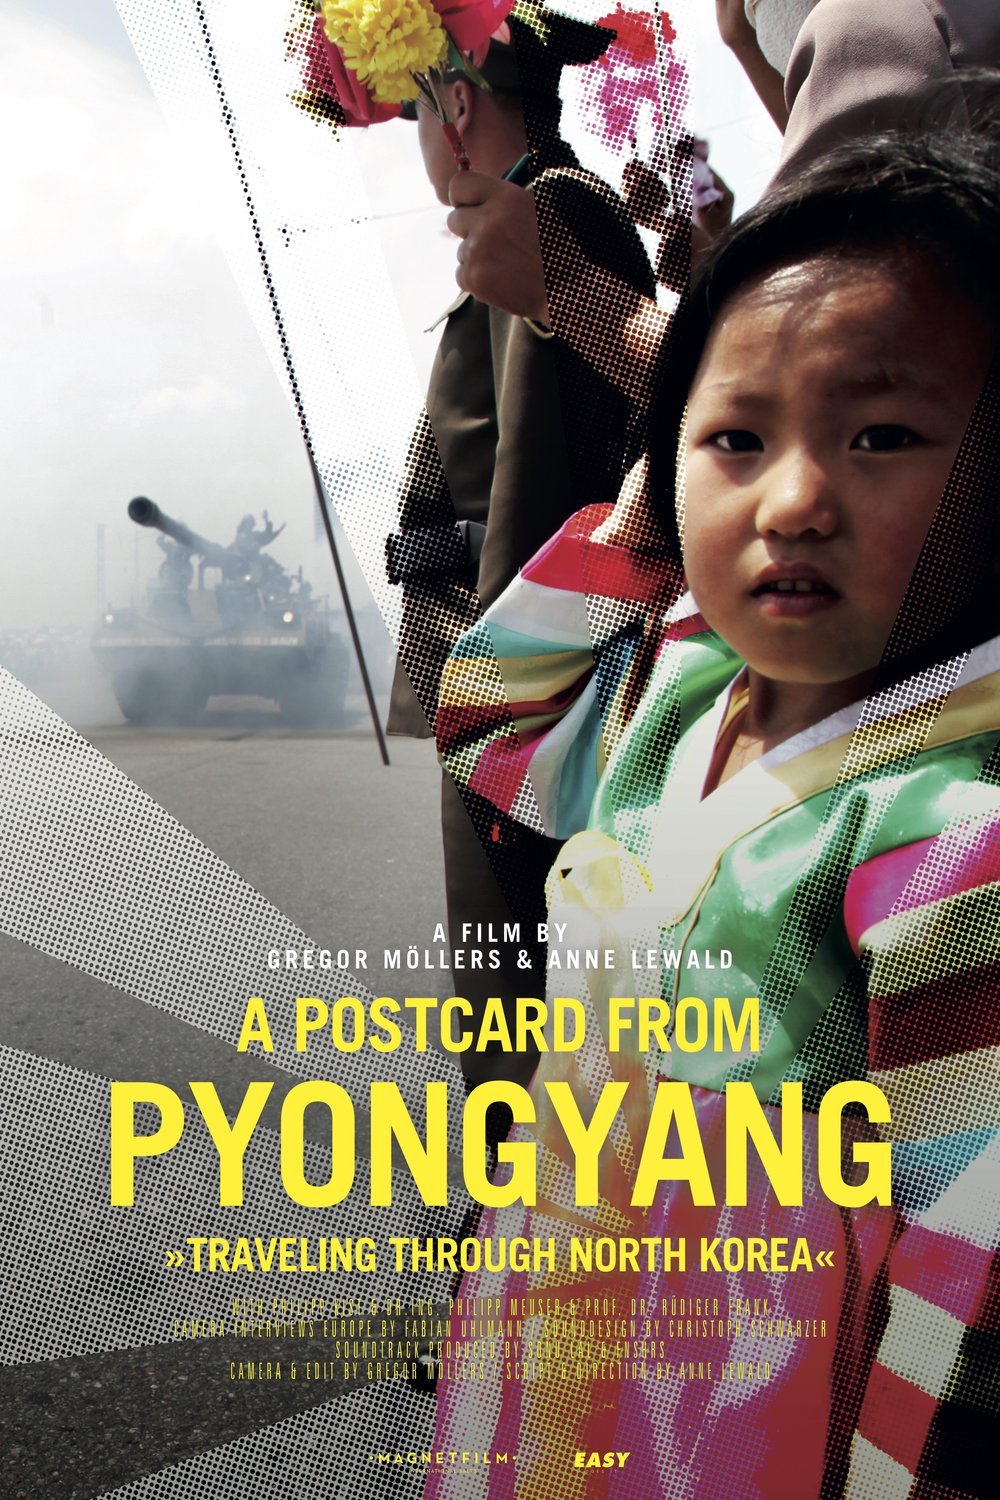 L'affiche du film A Postcard from Pyongyang - Traveling through Northkorea